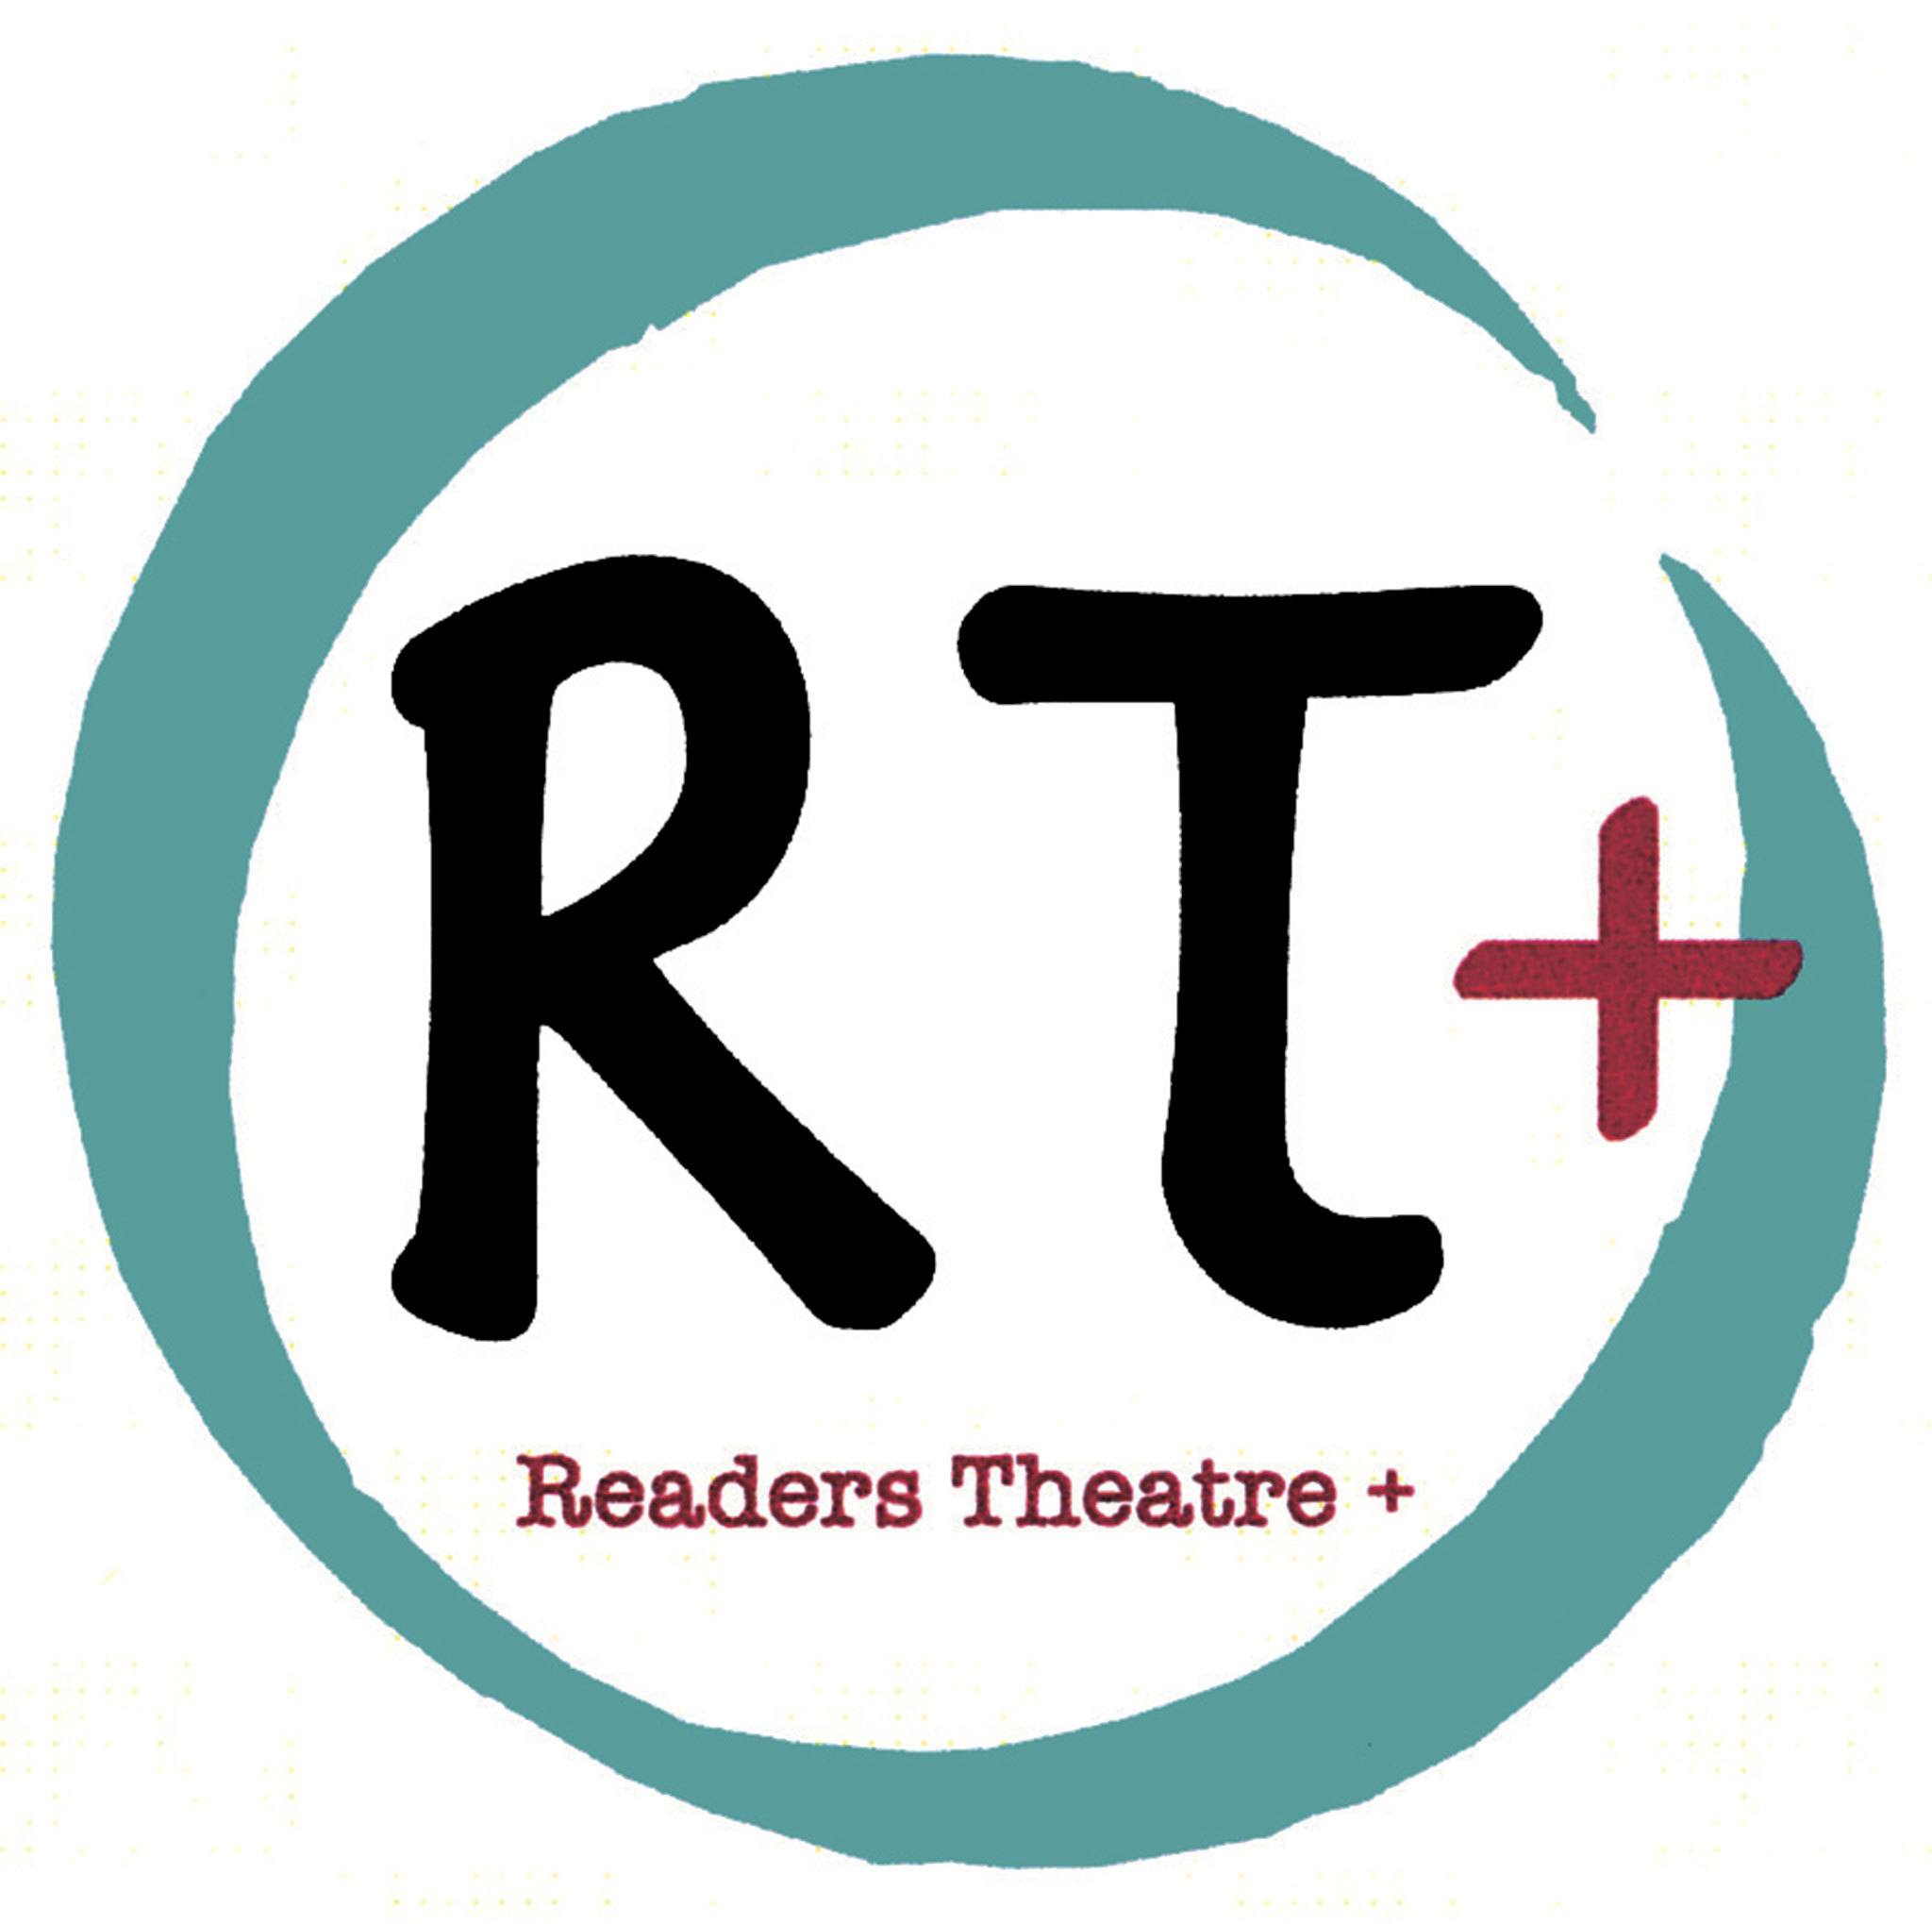 Charlotte Watts made the logo for Readers Theatre Plus in 2006. Submitted graphic